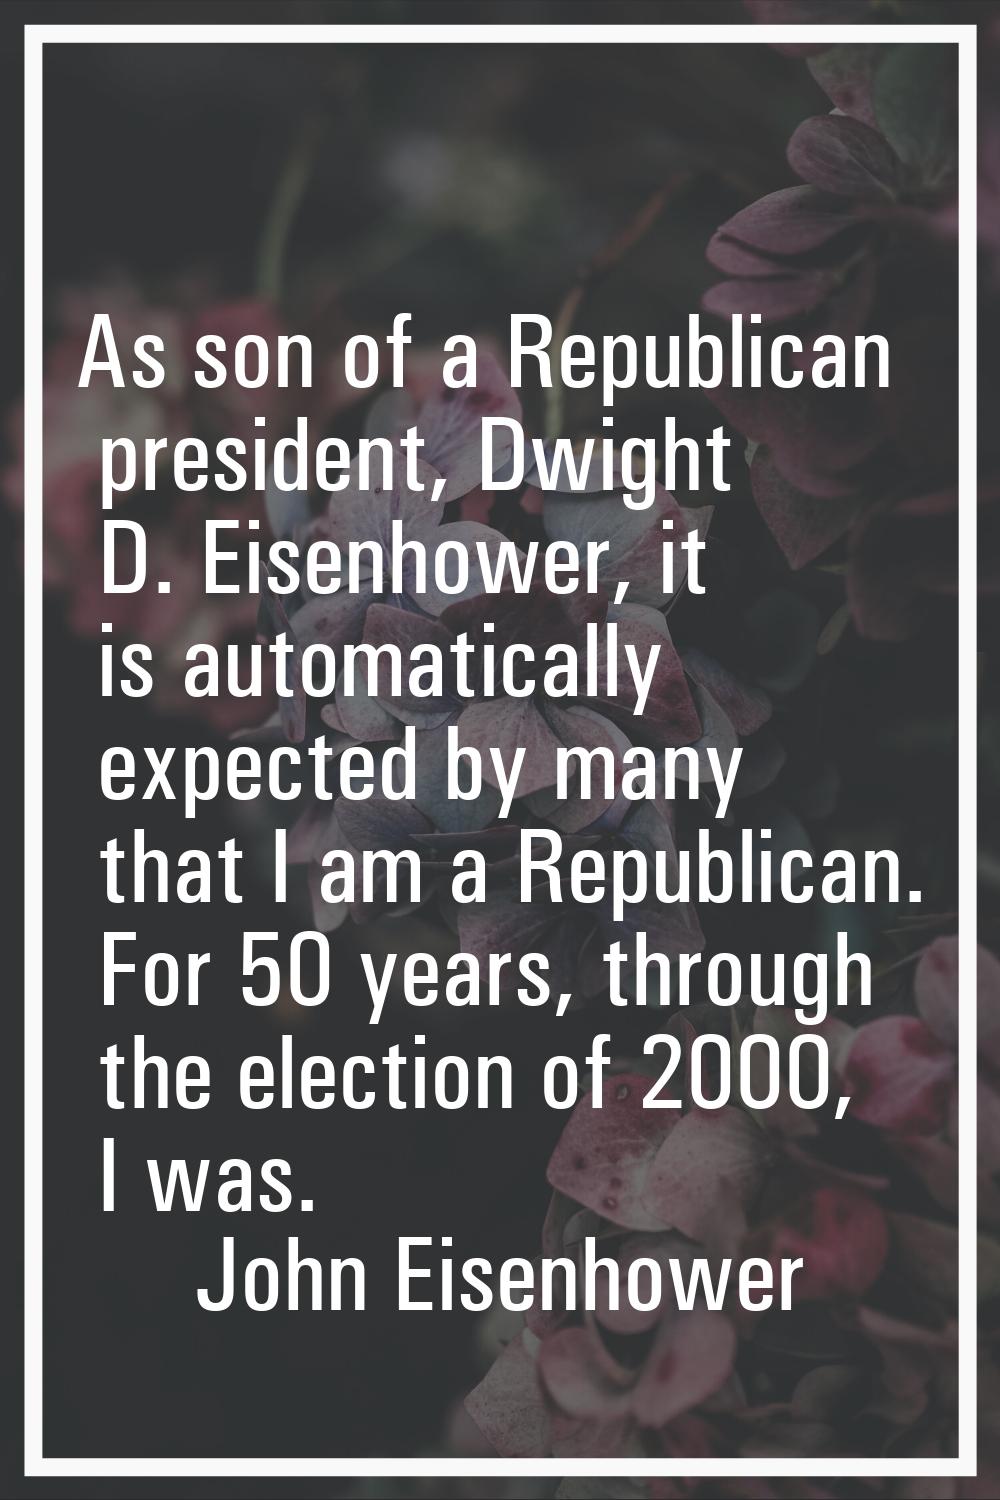 As son of a Republican president, Dwight D. Eisenhower, it is automatically expected by many that I